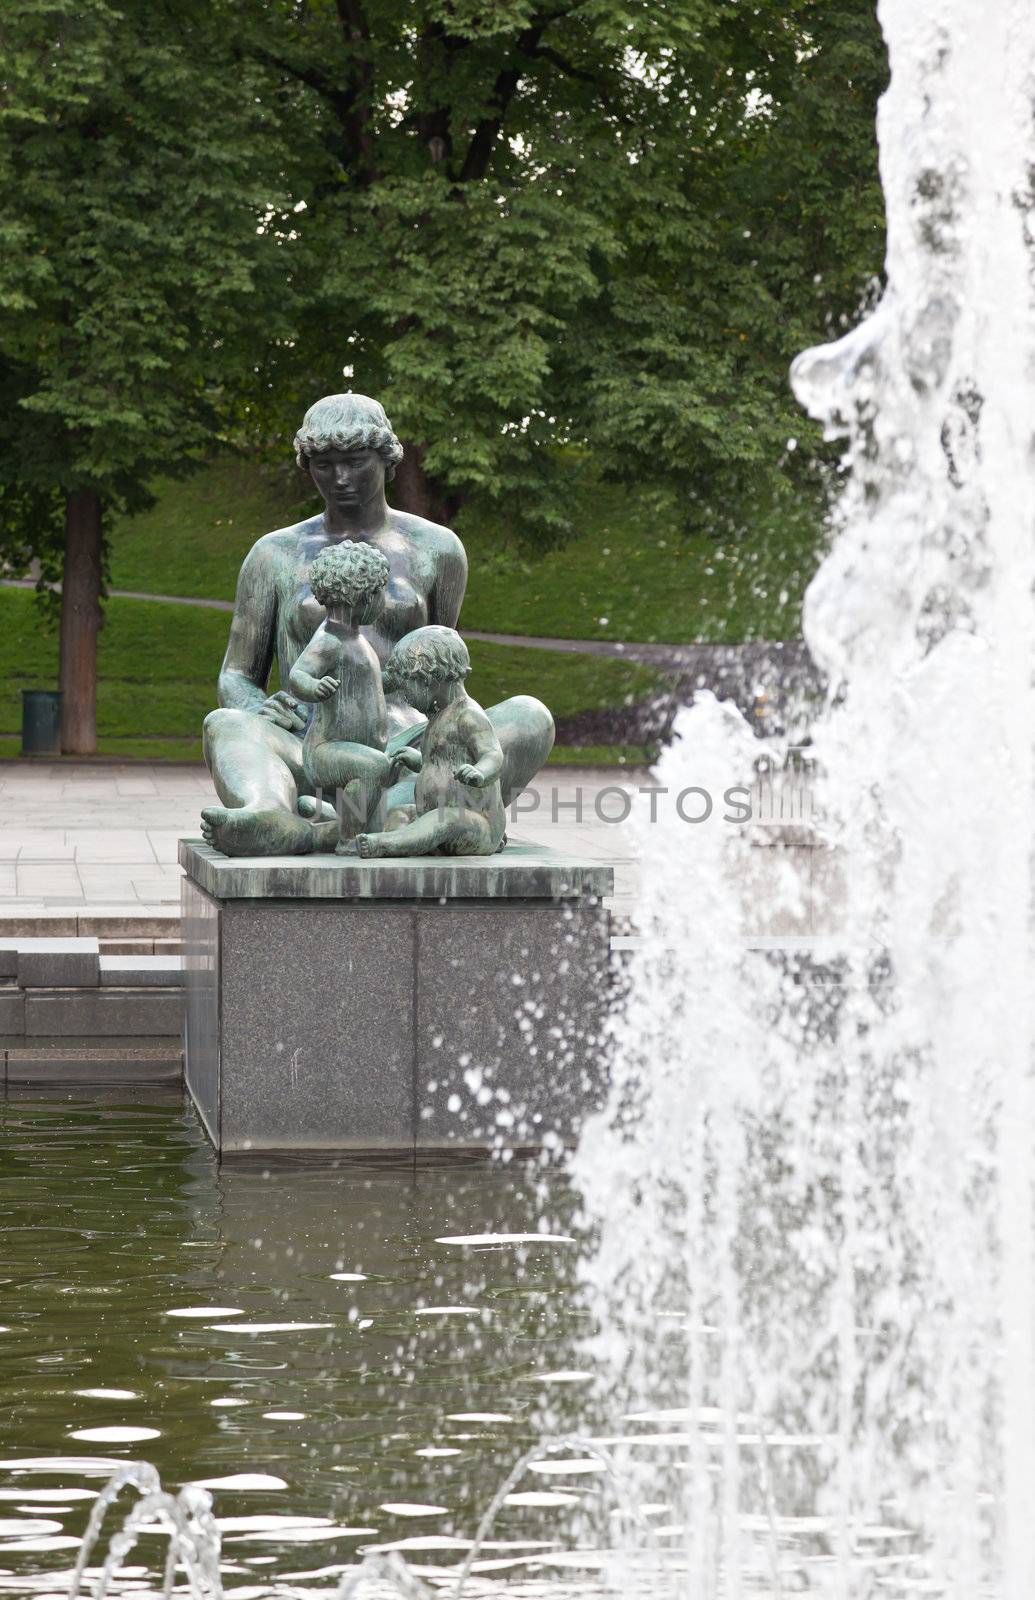 The sculpturre in front of Oslo City Hall in central Oslo Norway